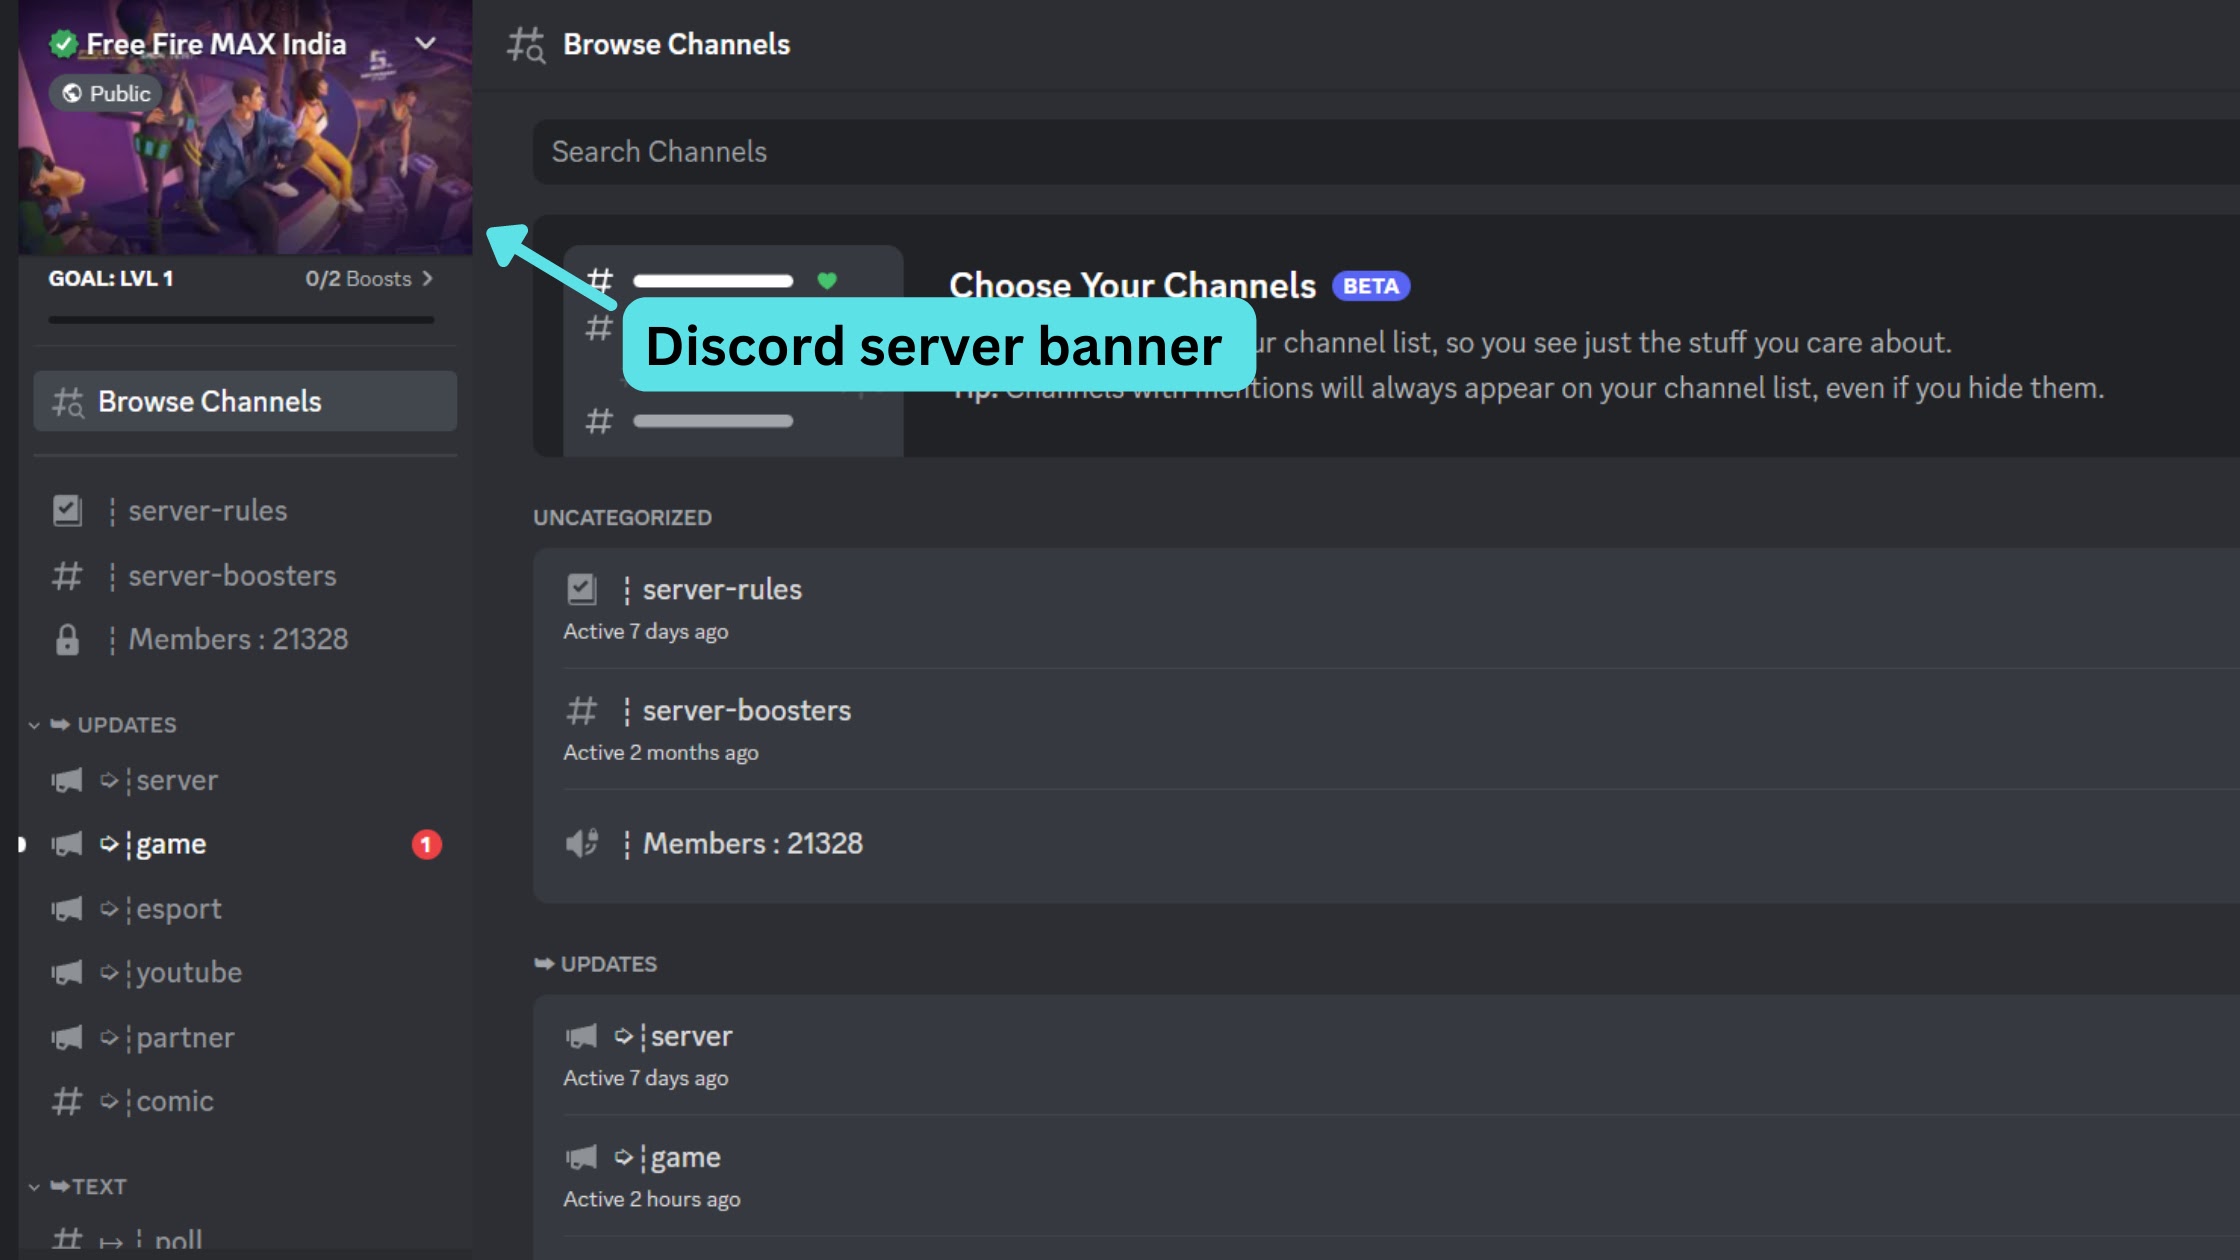 What is discord server banner